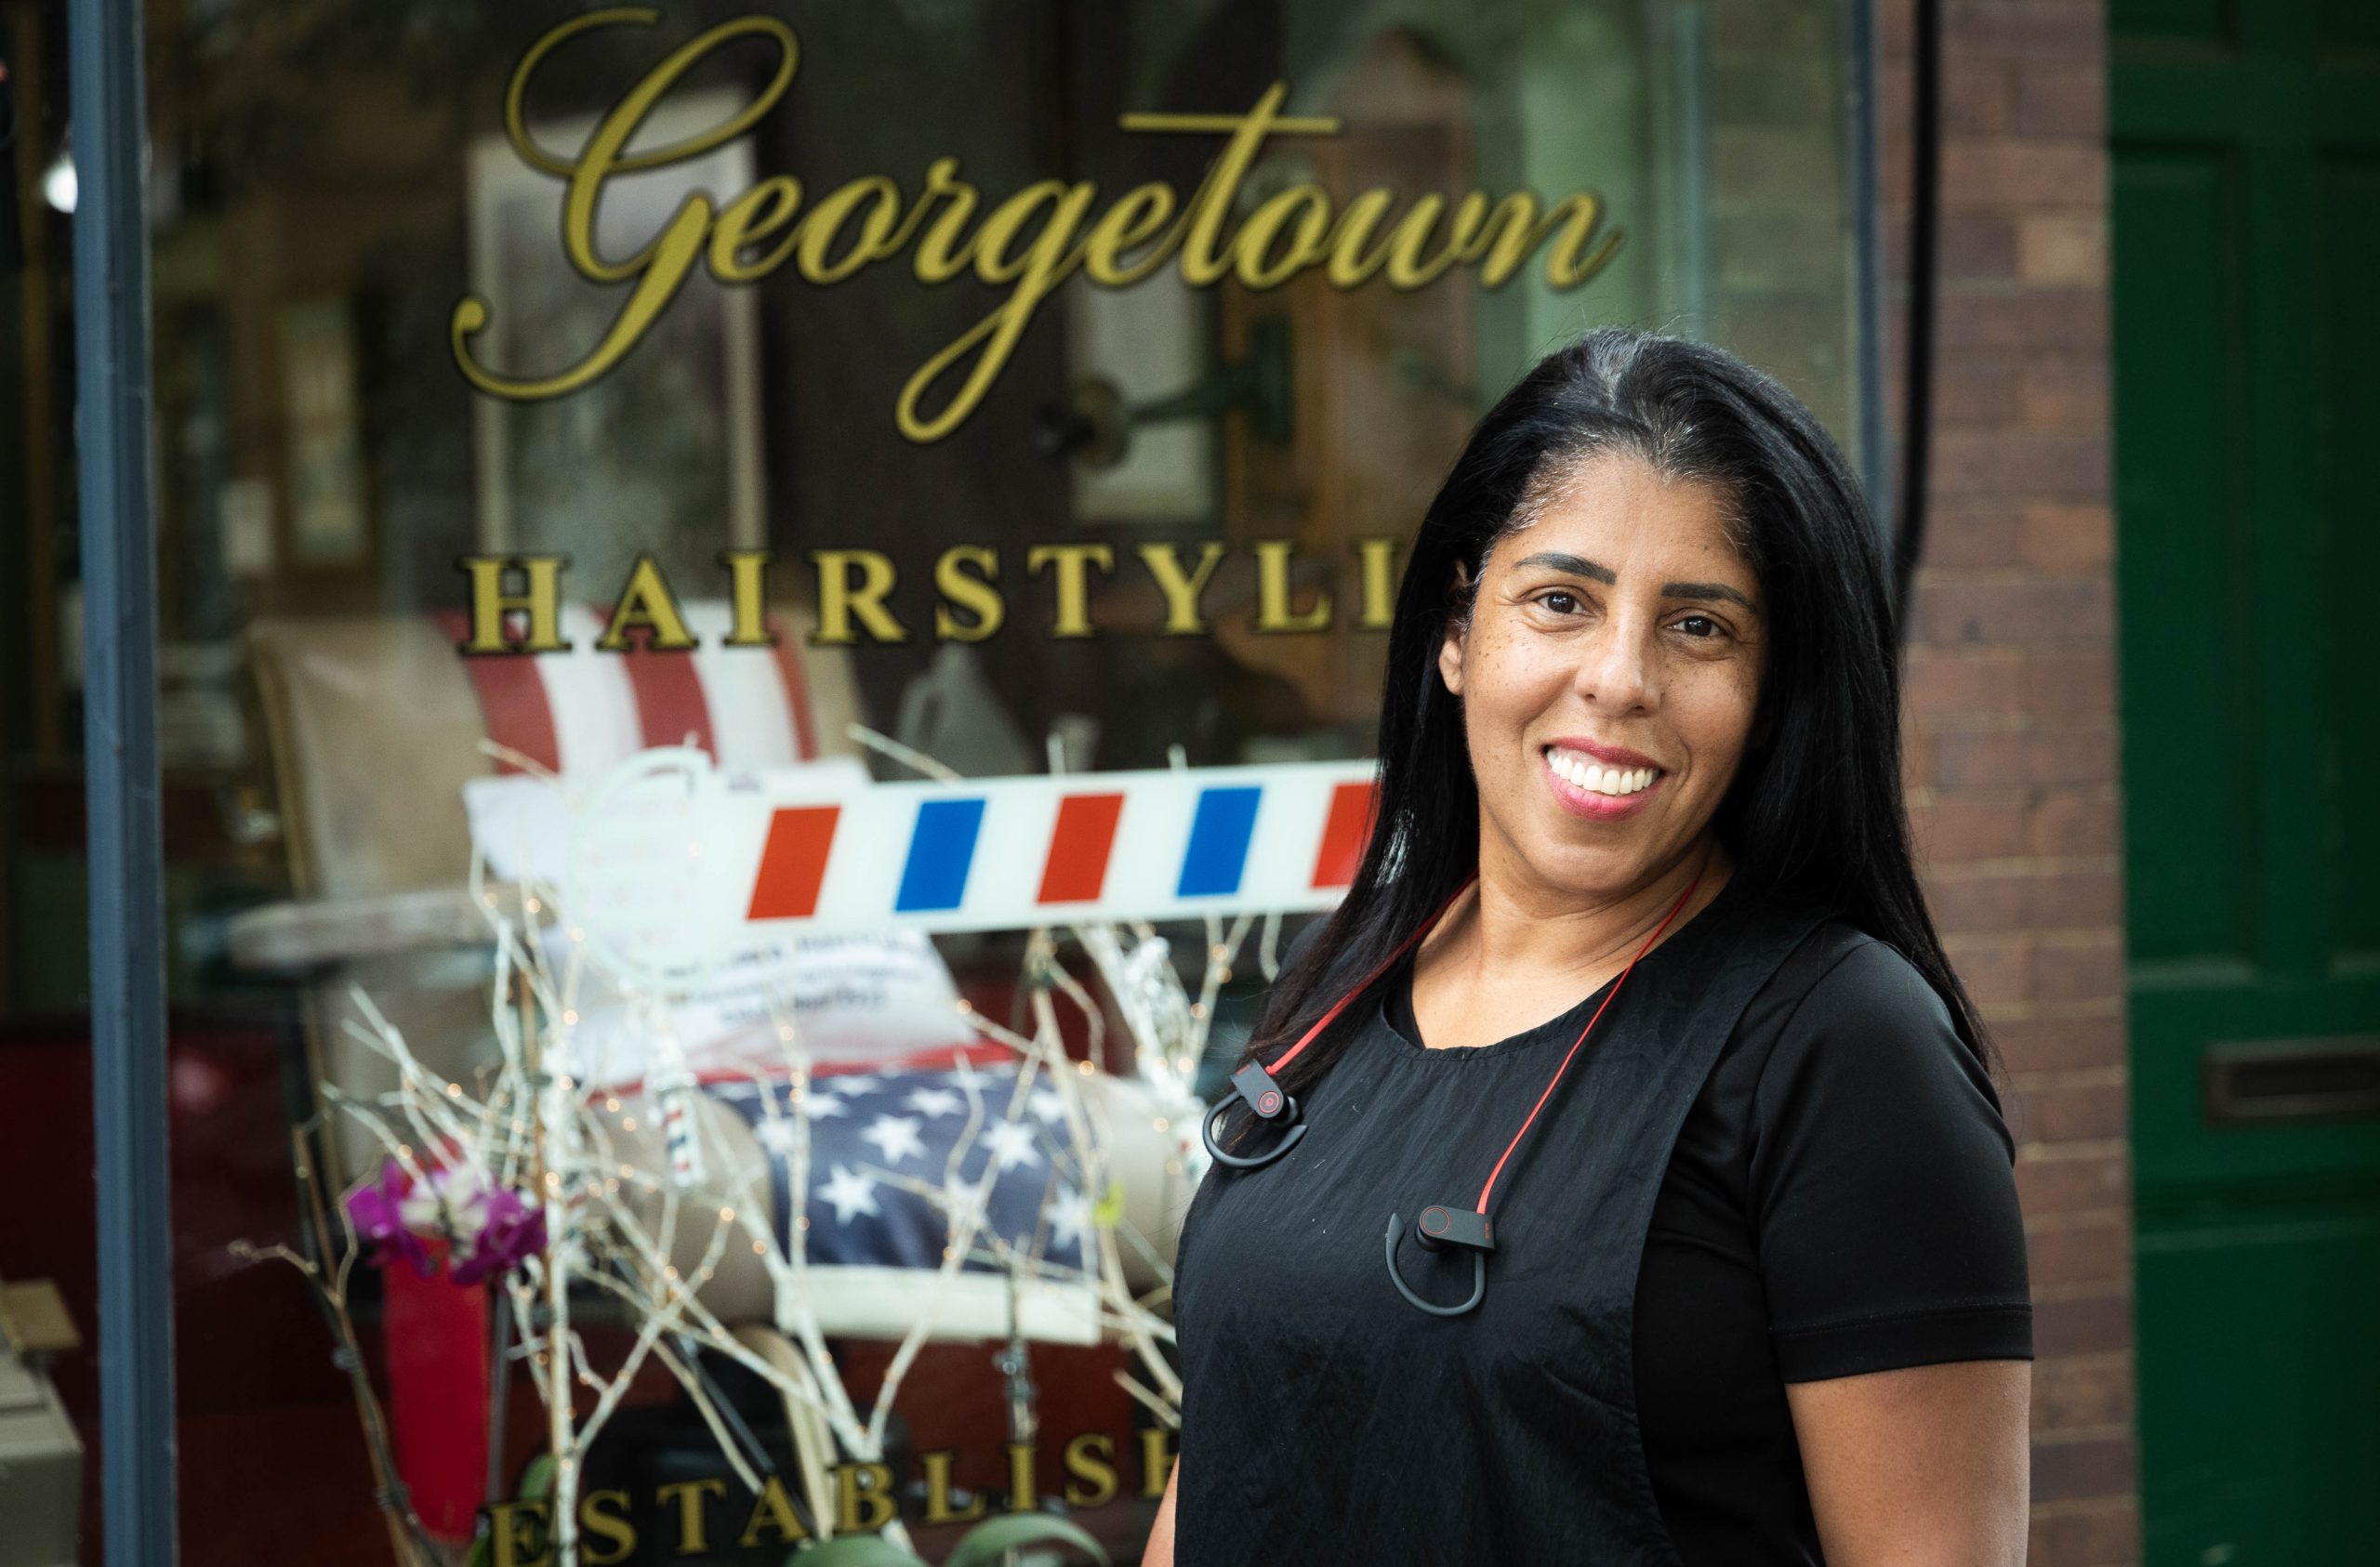 An image of —Vanussa Mendes, who owns Georgetown Hairstyling 